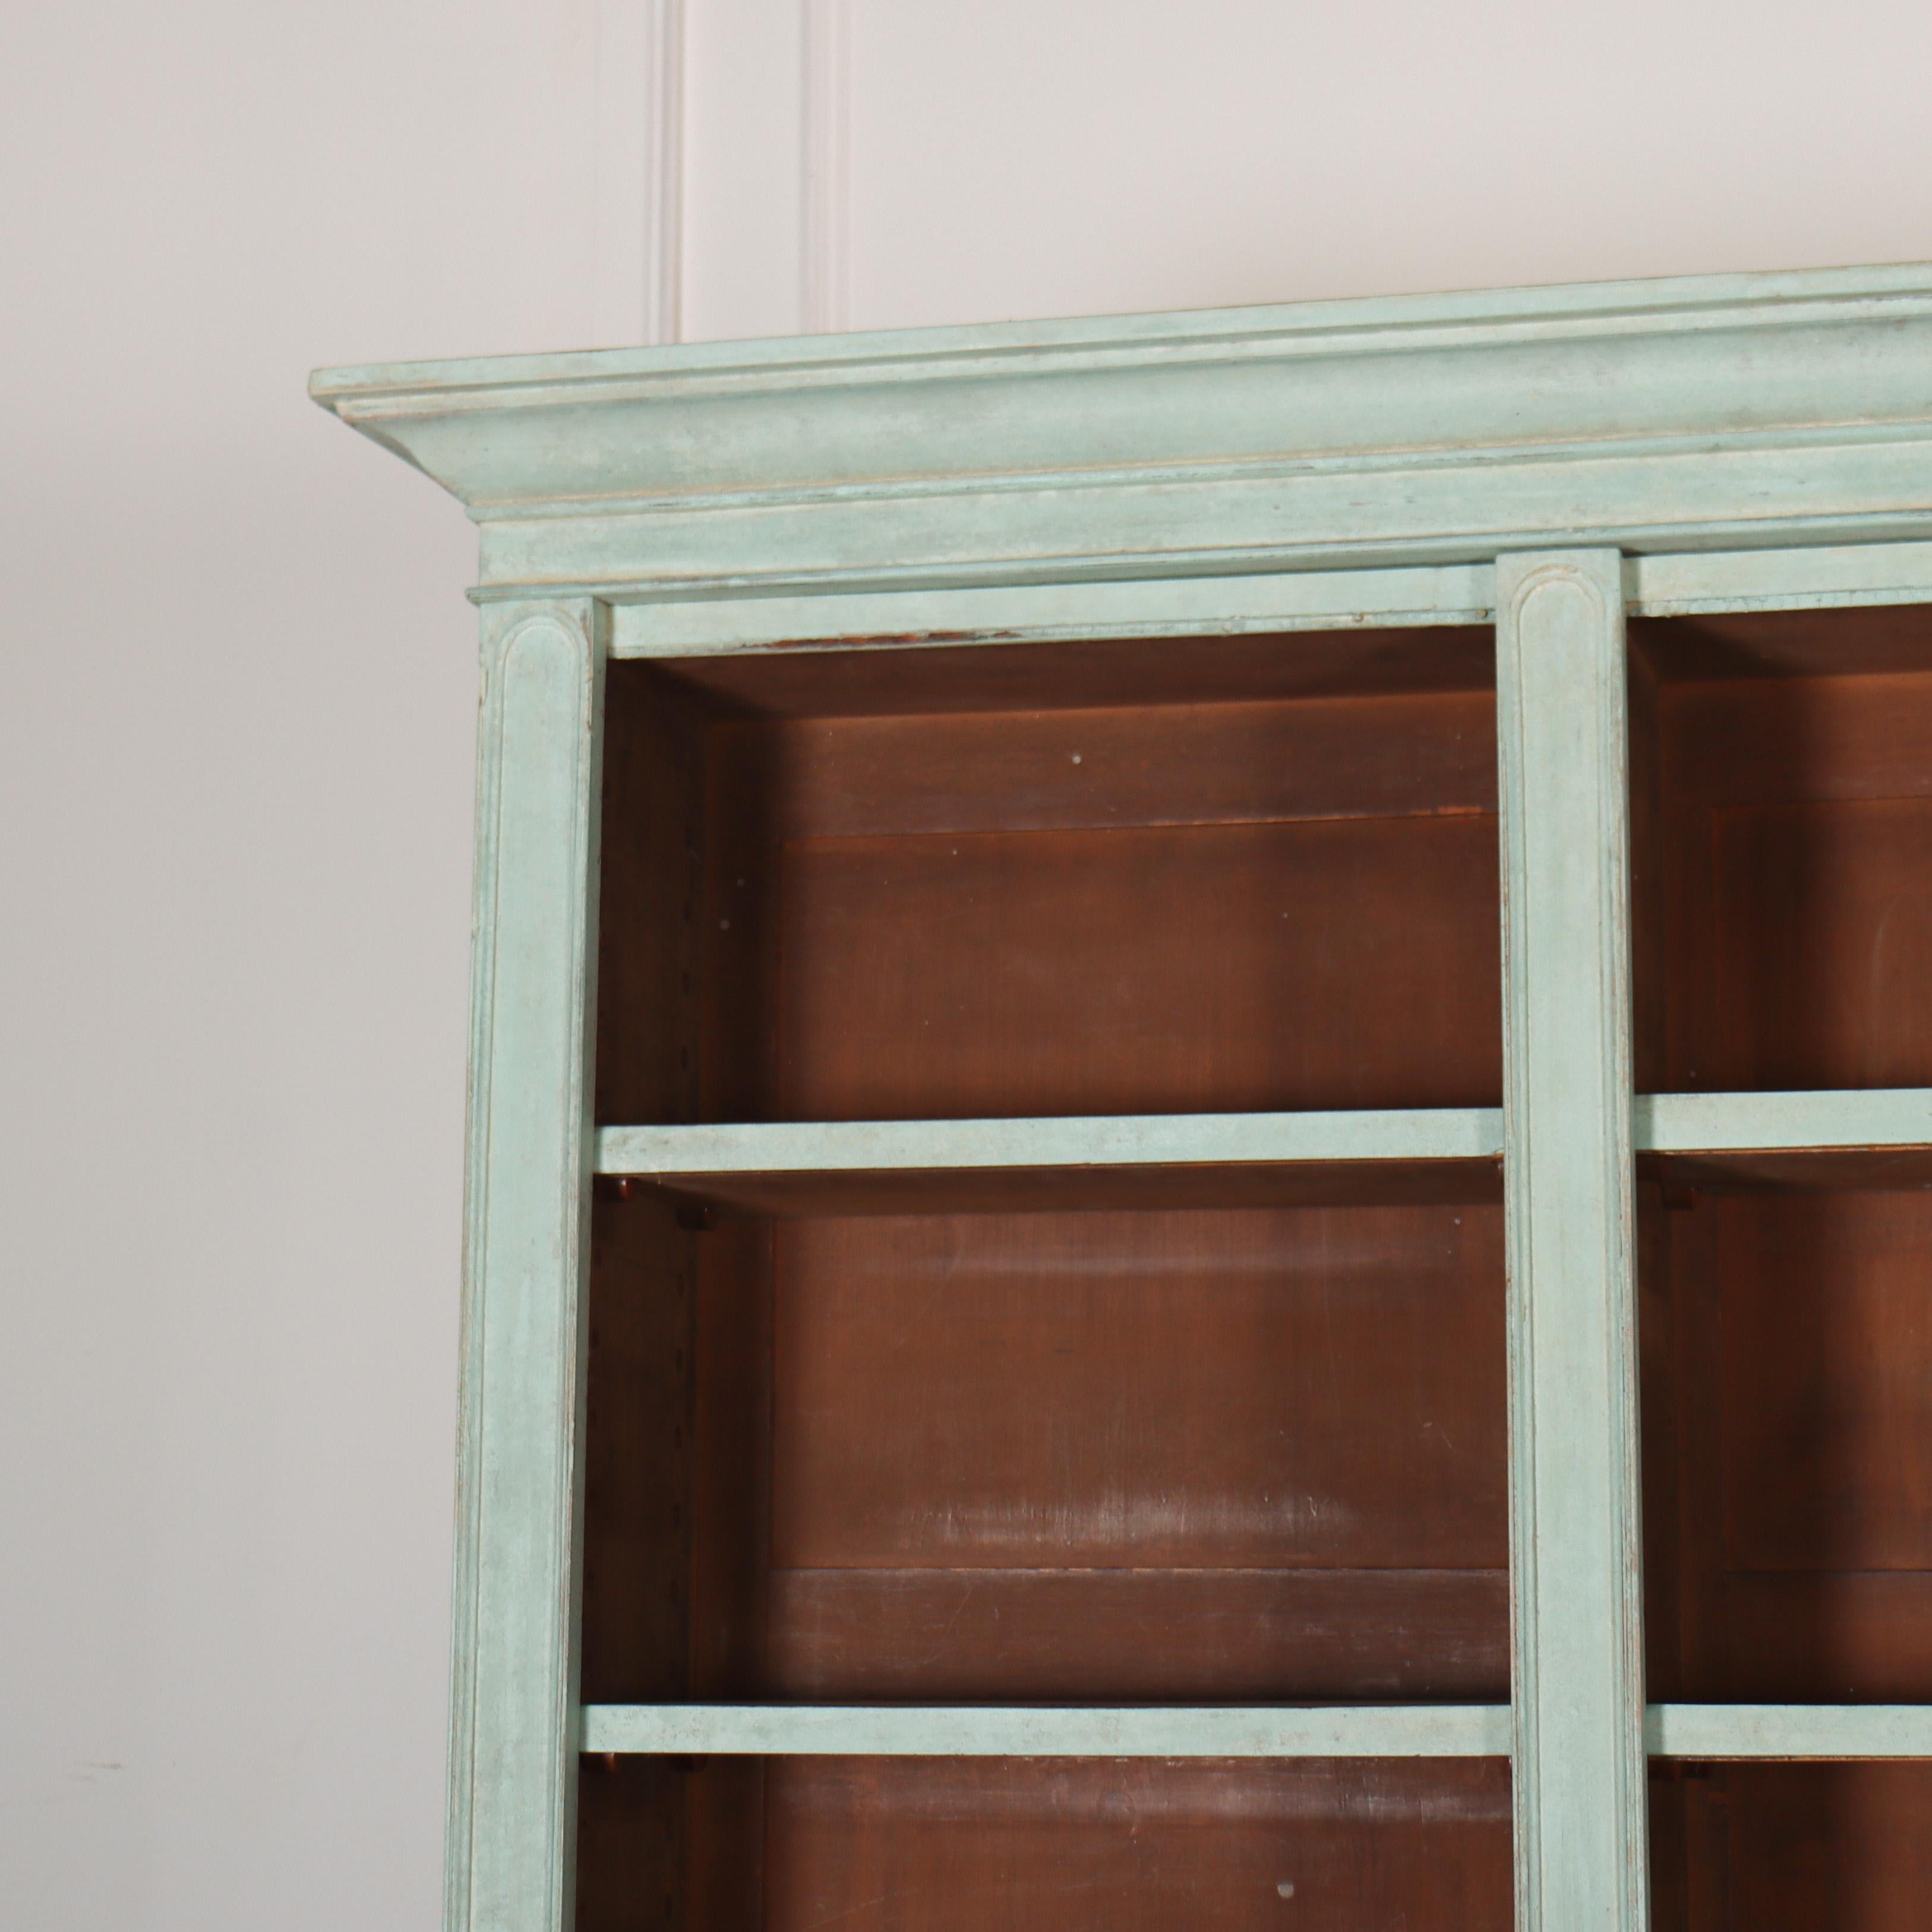 Very useful early 19th C English painted pine open bookcase with adjustable shelving. 1830.

Upper shelf depth is 8